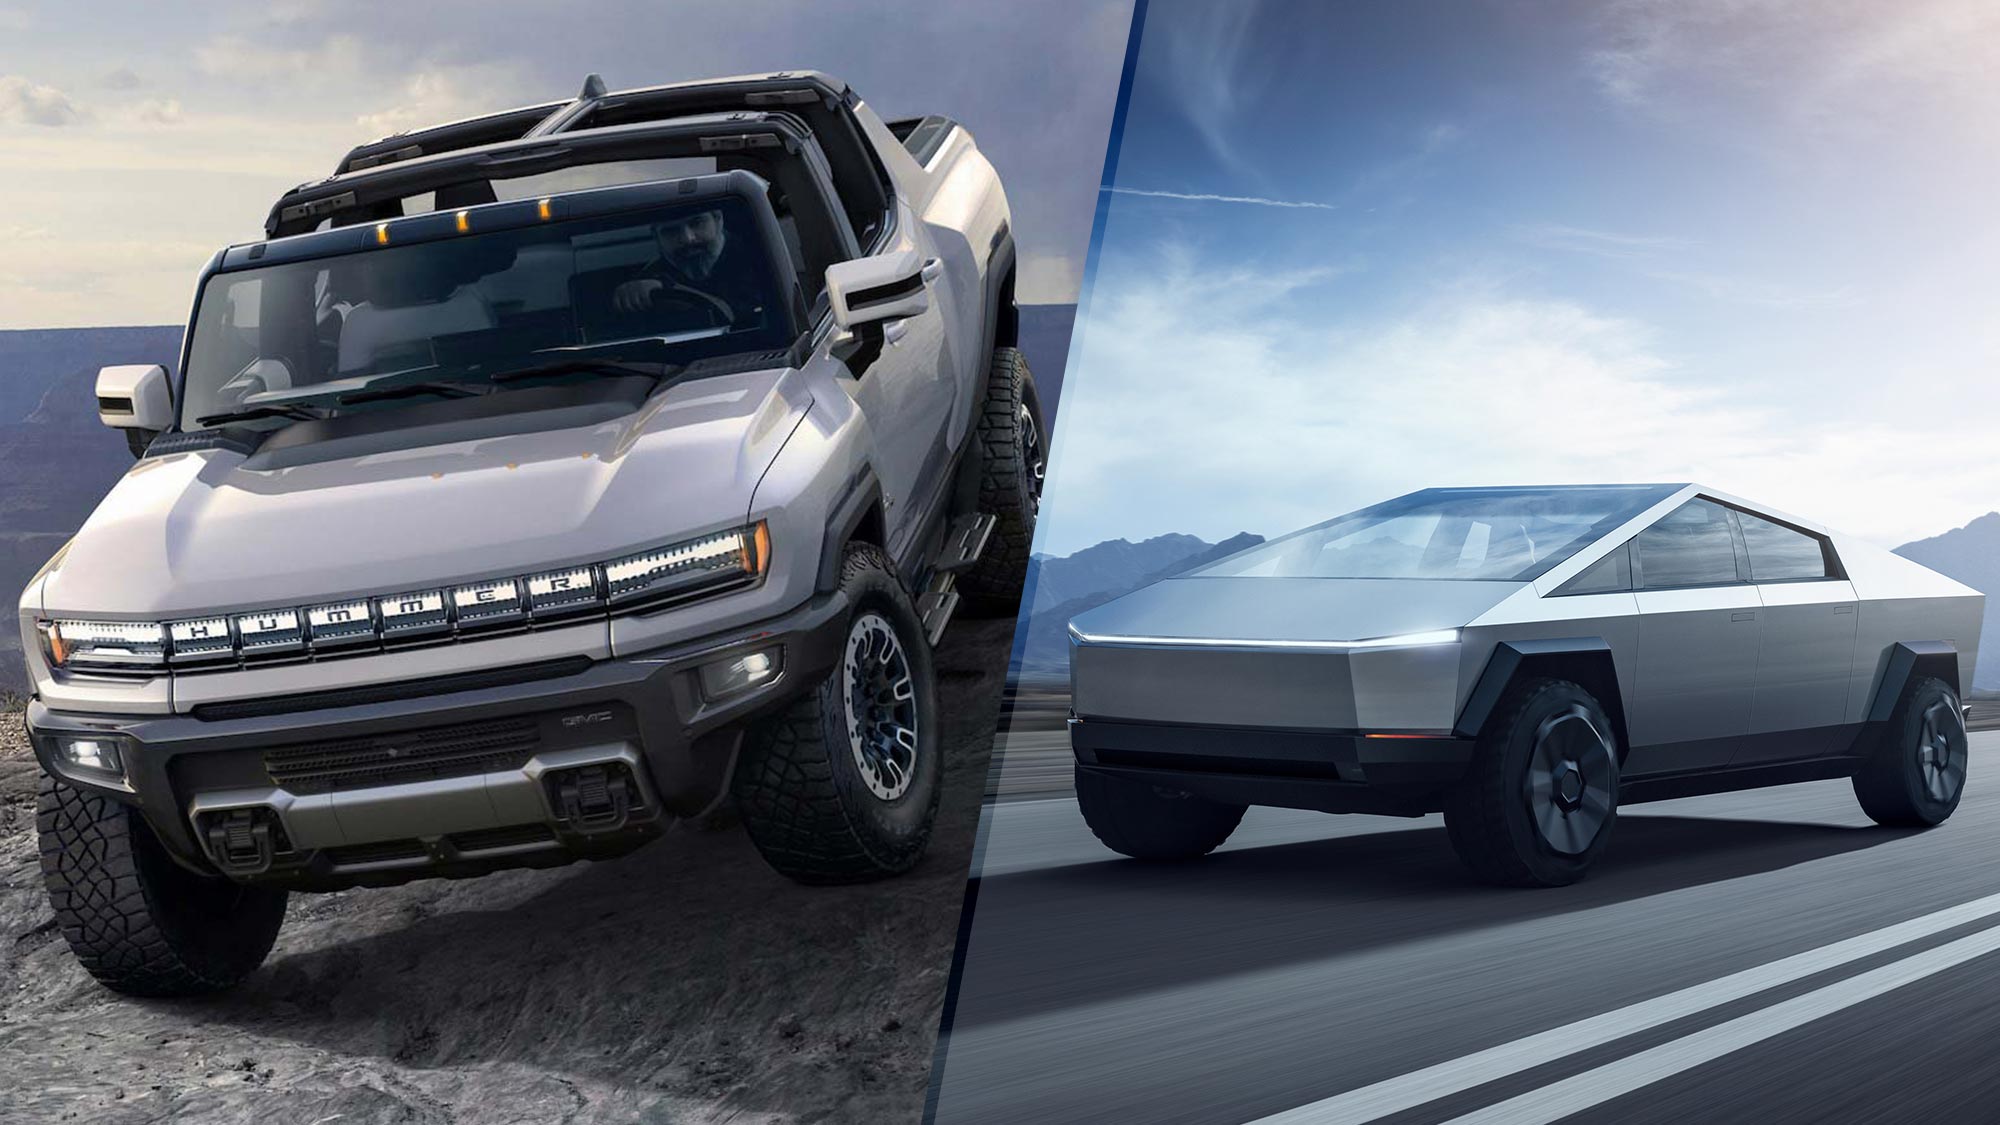 Best Tesla Cybertruck Vs Hummer H2  How Does It Compare In Terms Of Size And Power   Learn more here 